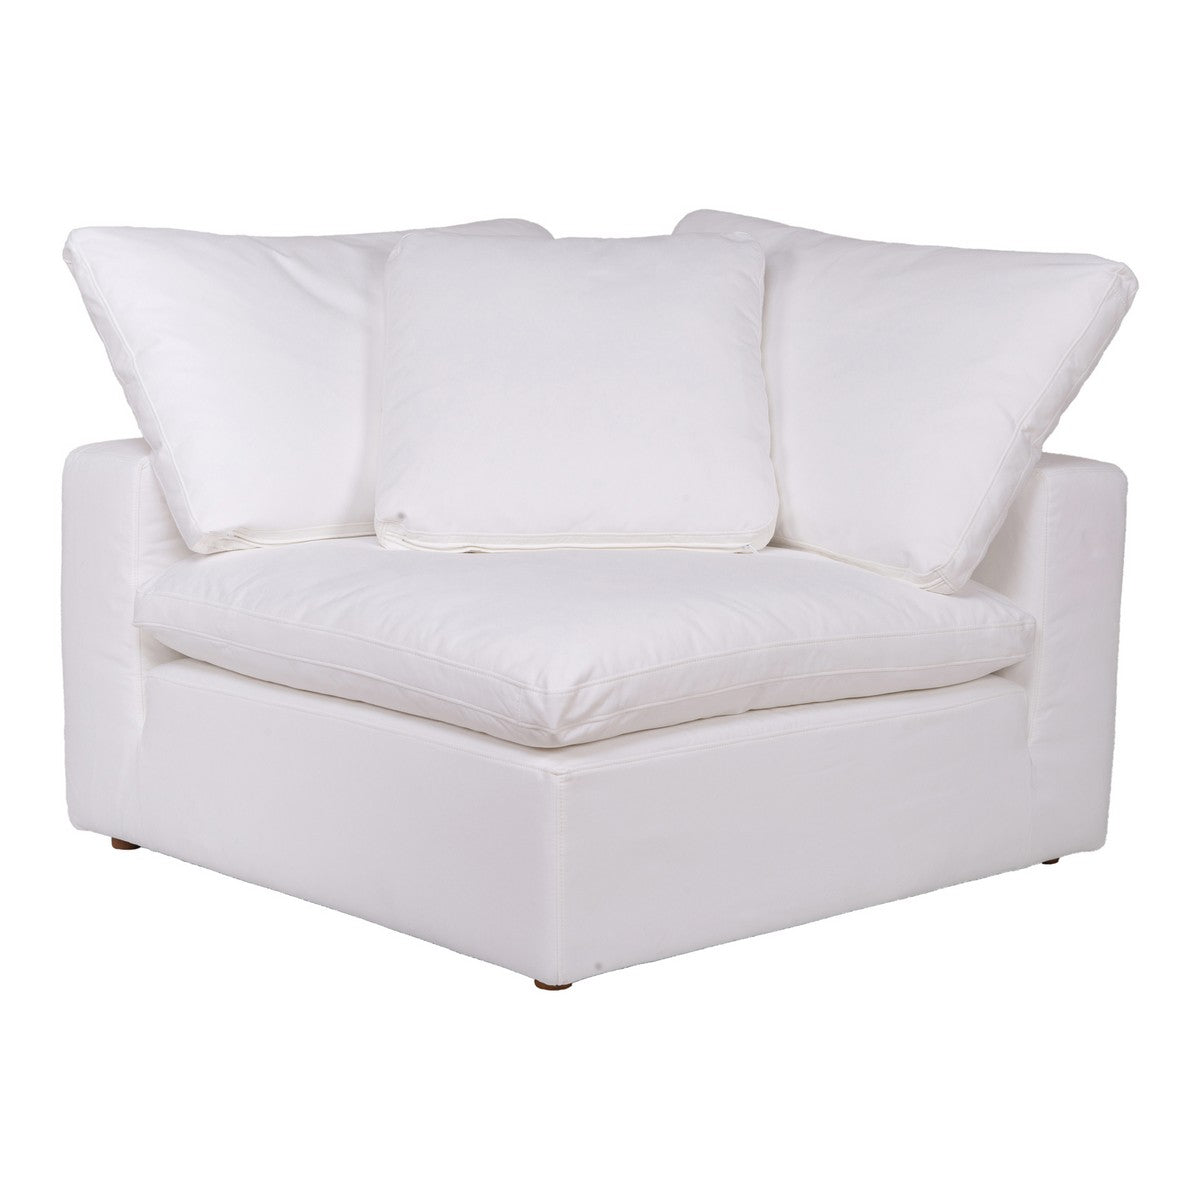 Moe's Home Collection Clay Corner Chair Livesmart Fabric Cream - YJ-1000-05 - Moe's Home Collection - Corner Chairs - Minimal And Modern - 1